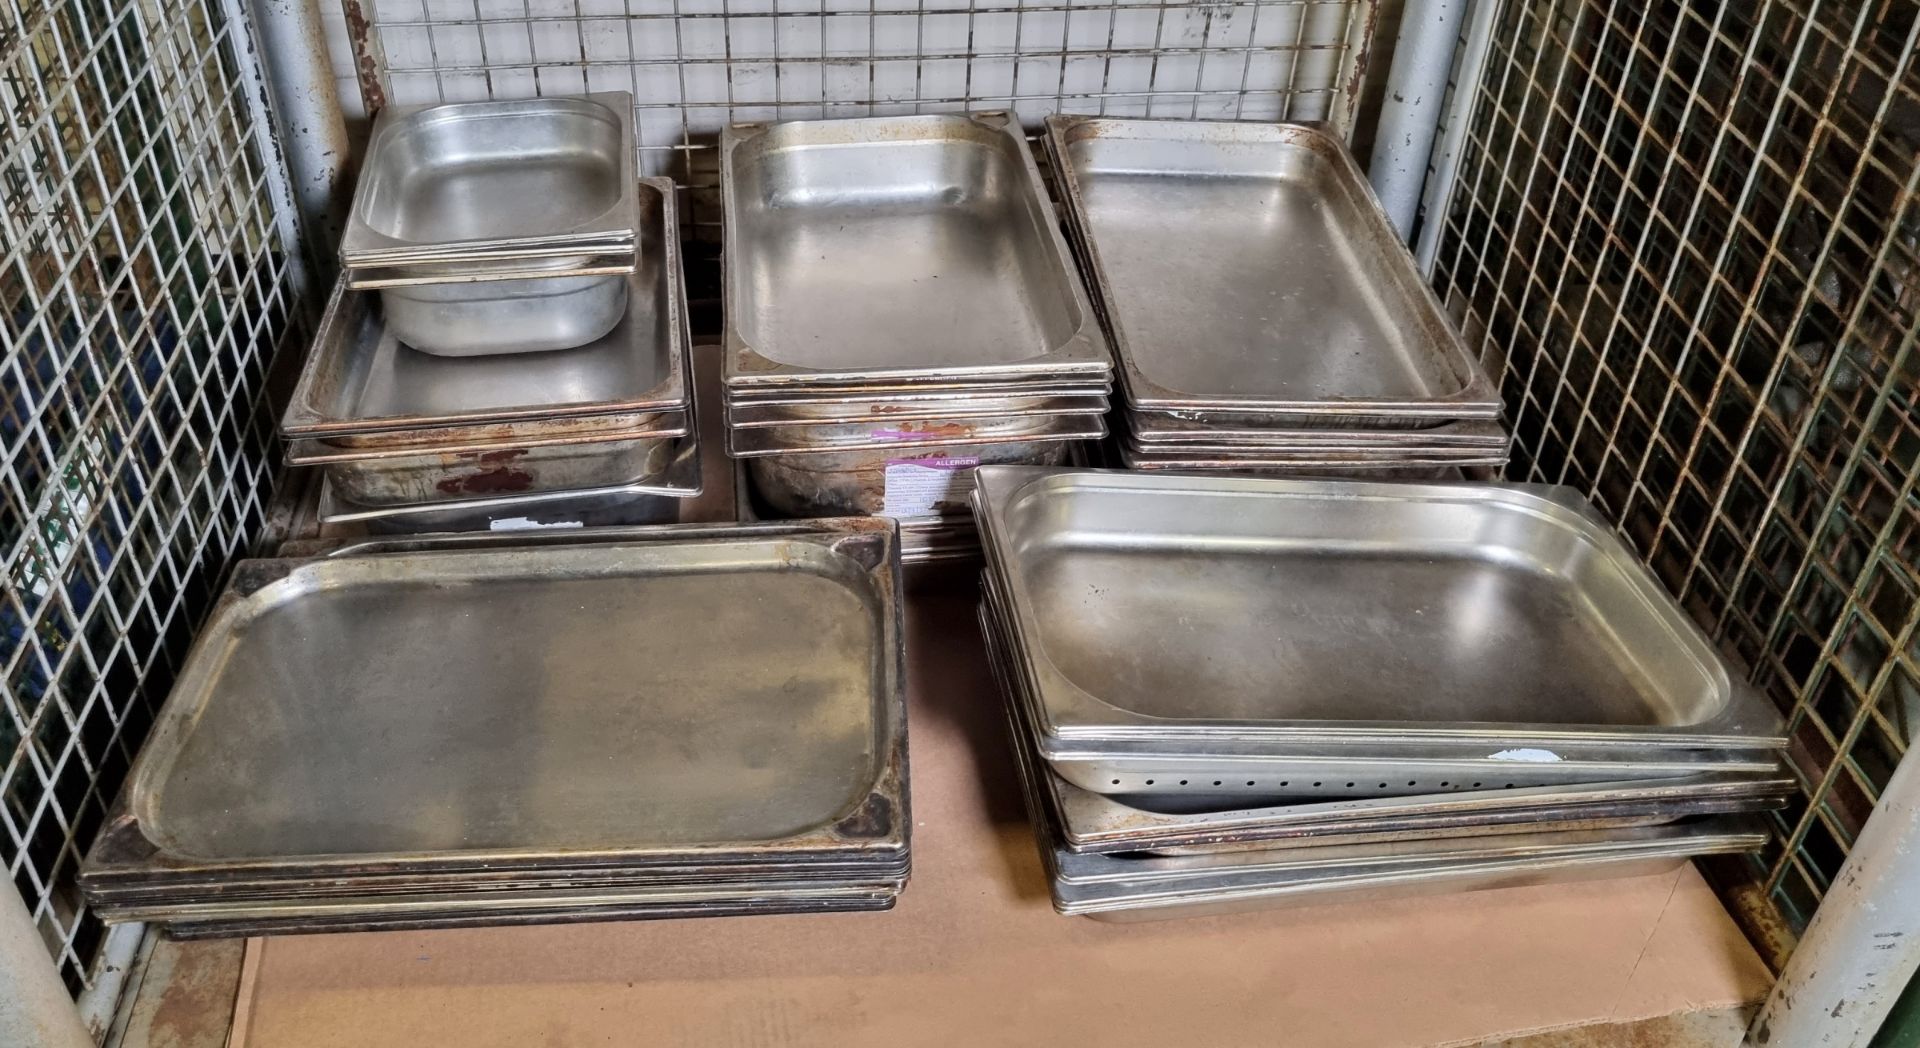 Catering spares - gastronorm pans and lids mixed lengths and depths - Image 2 of 4